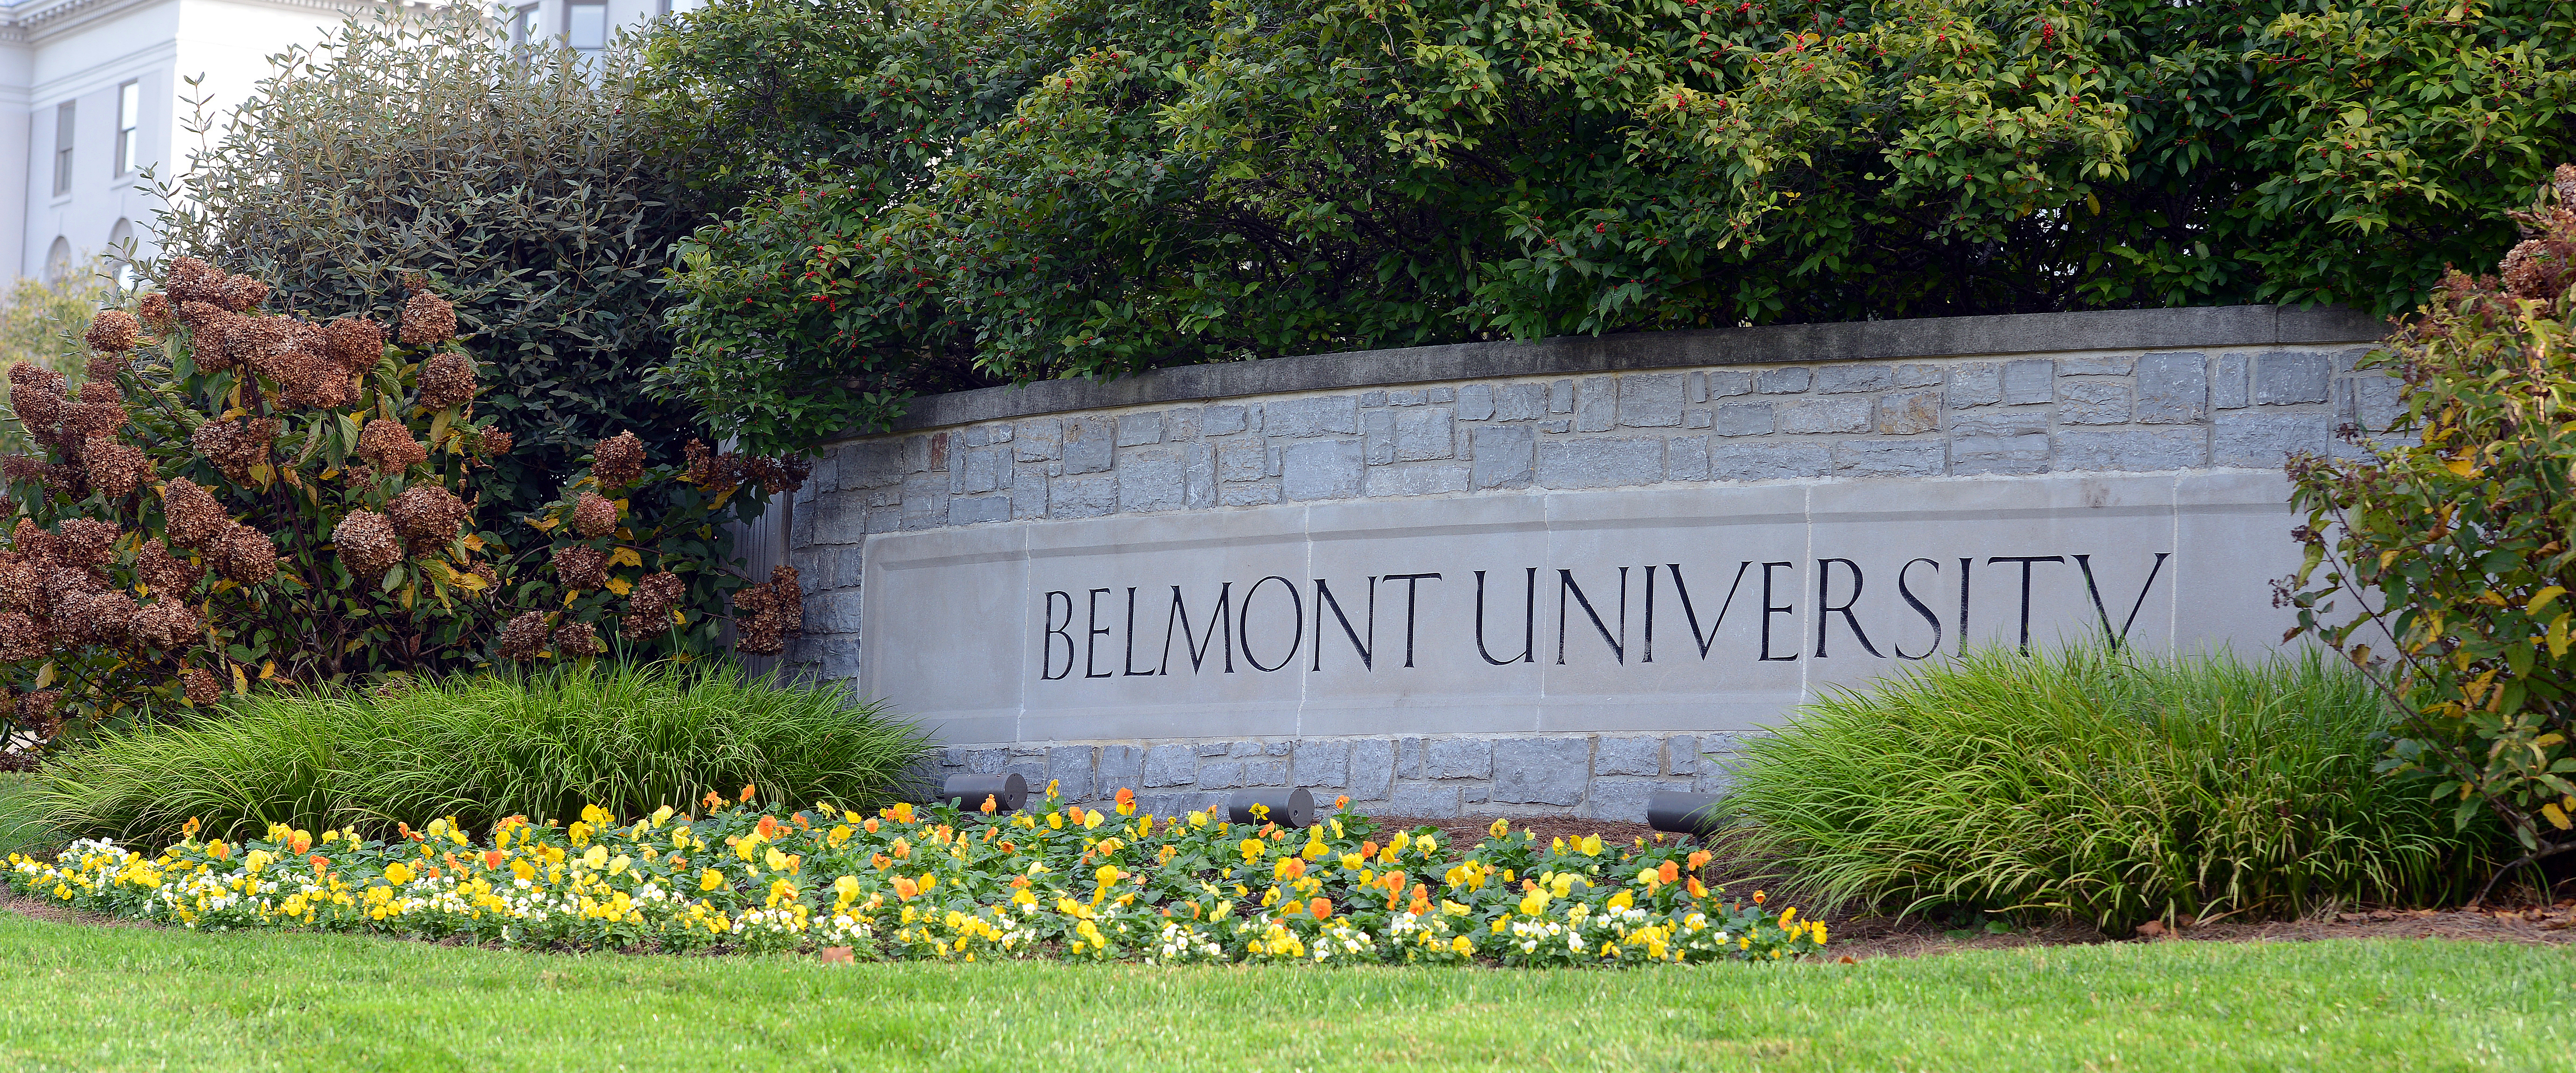 Belmont University stone sign outside on a sunny day with flowers blooming